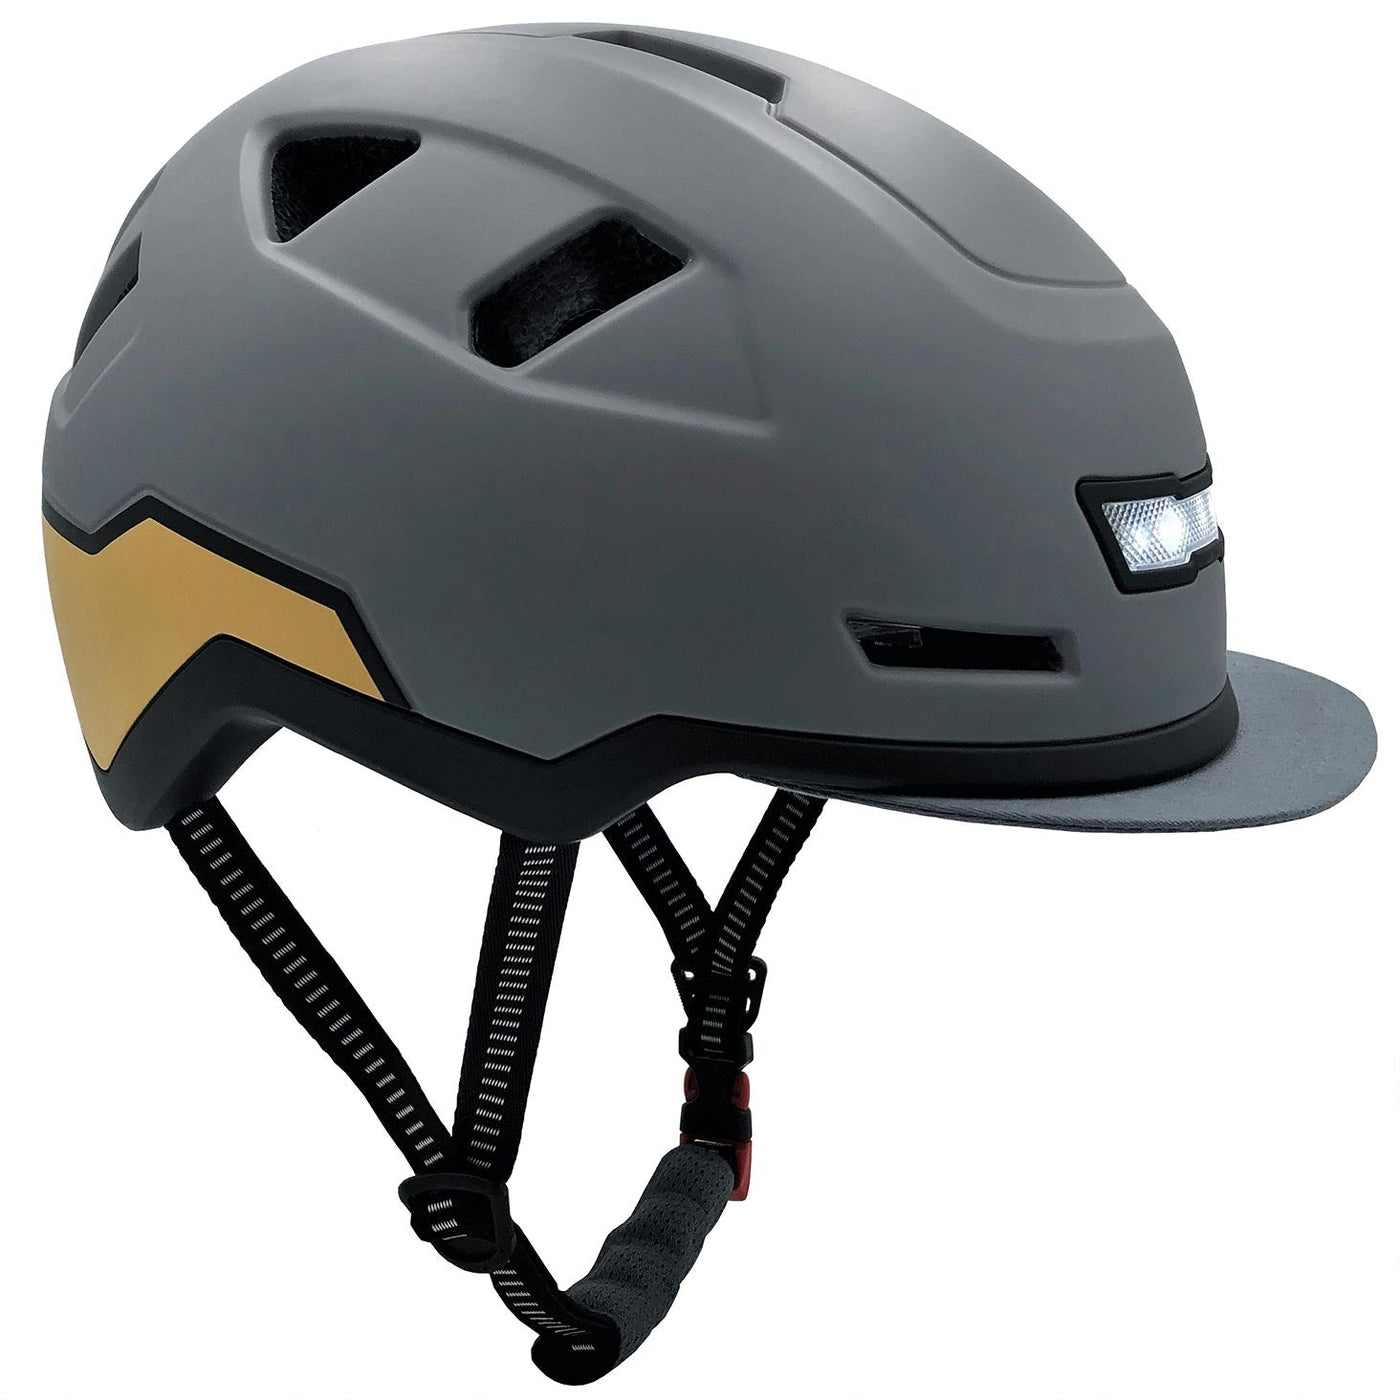 side view xnito ebike helmet with visor and lights in Gull grey